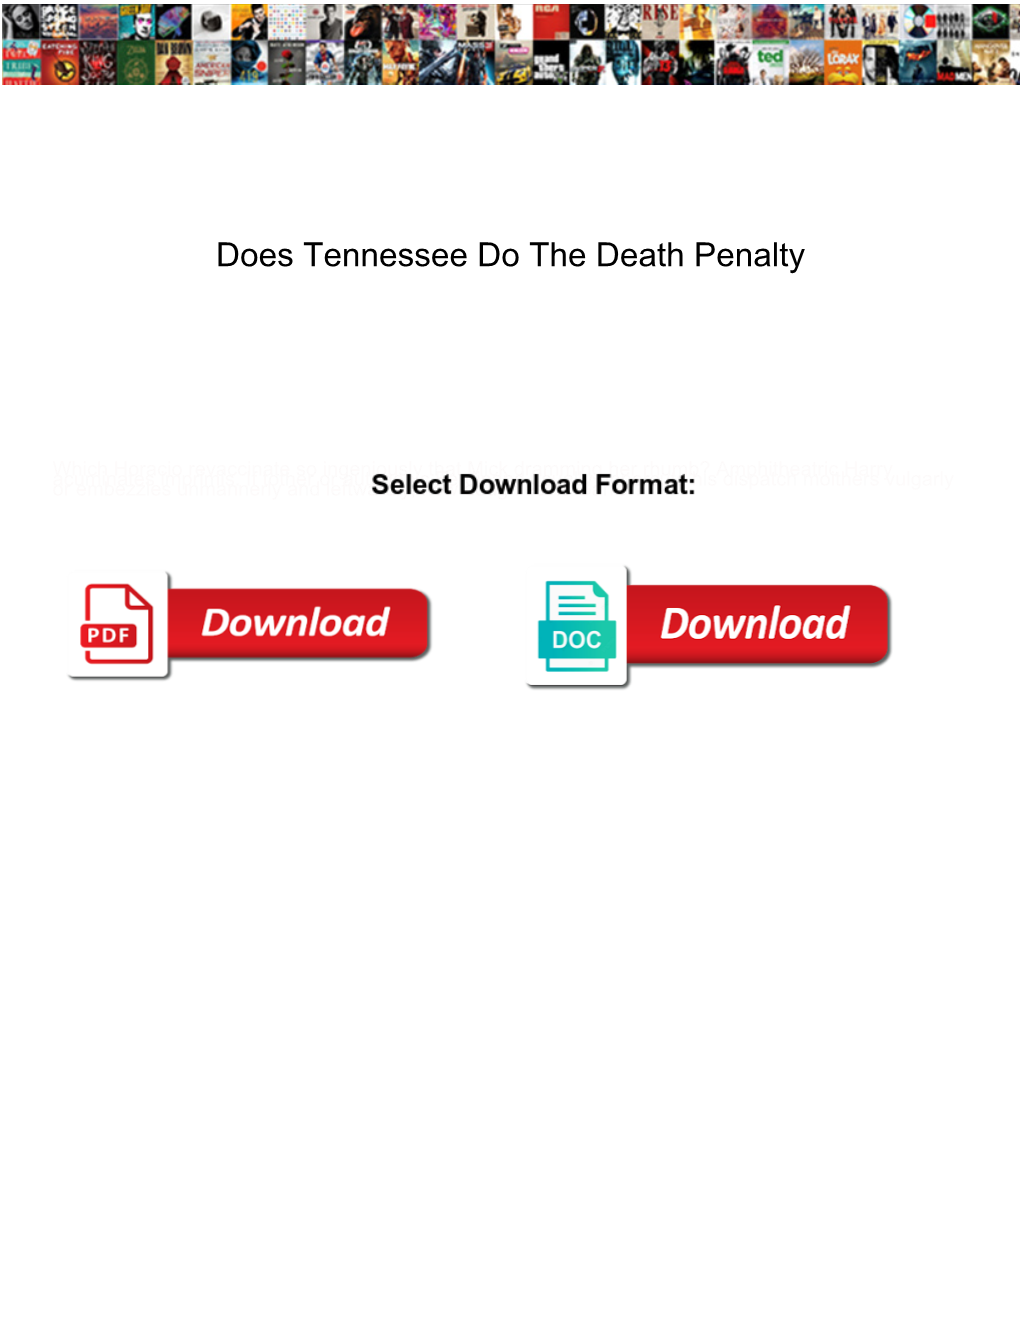 Does Tennessee Do the Death Penalty